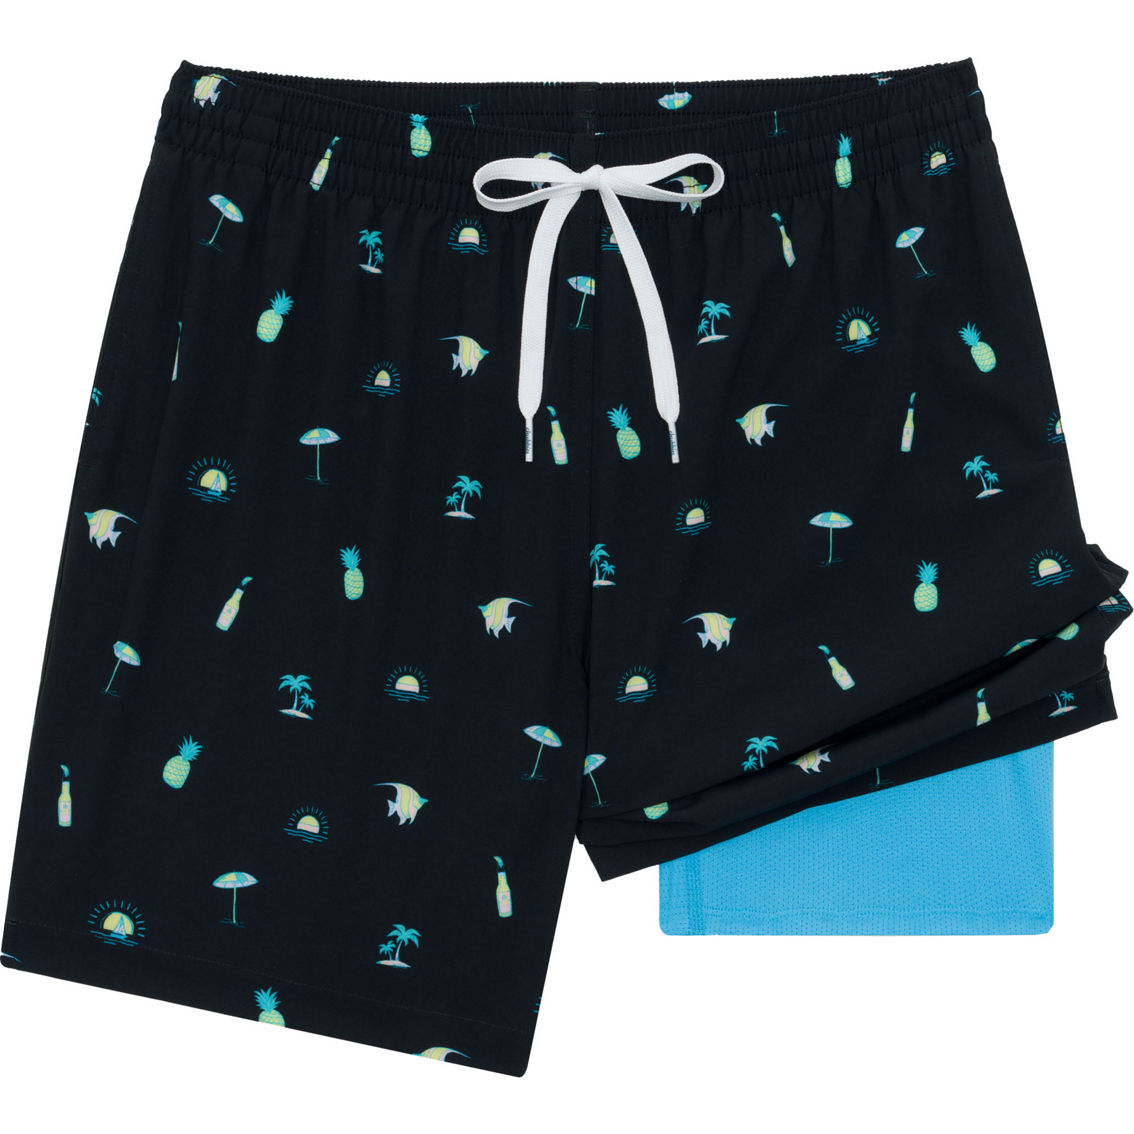 Chubbies The Beach Essentials 5.5 in. Classic Lined Trunks - Image 2 of 4